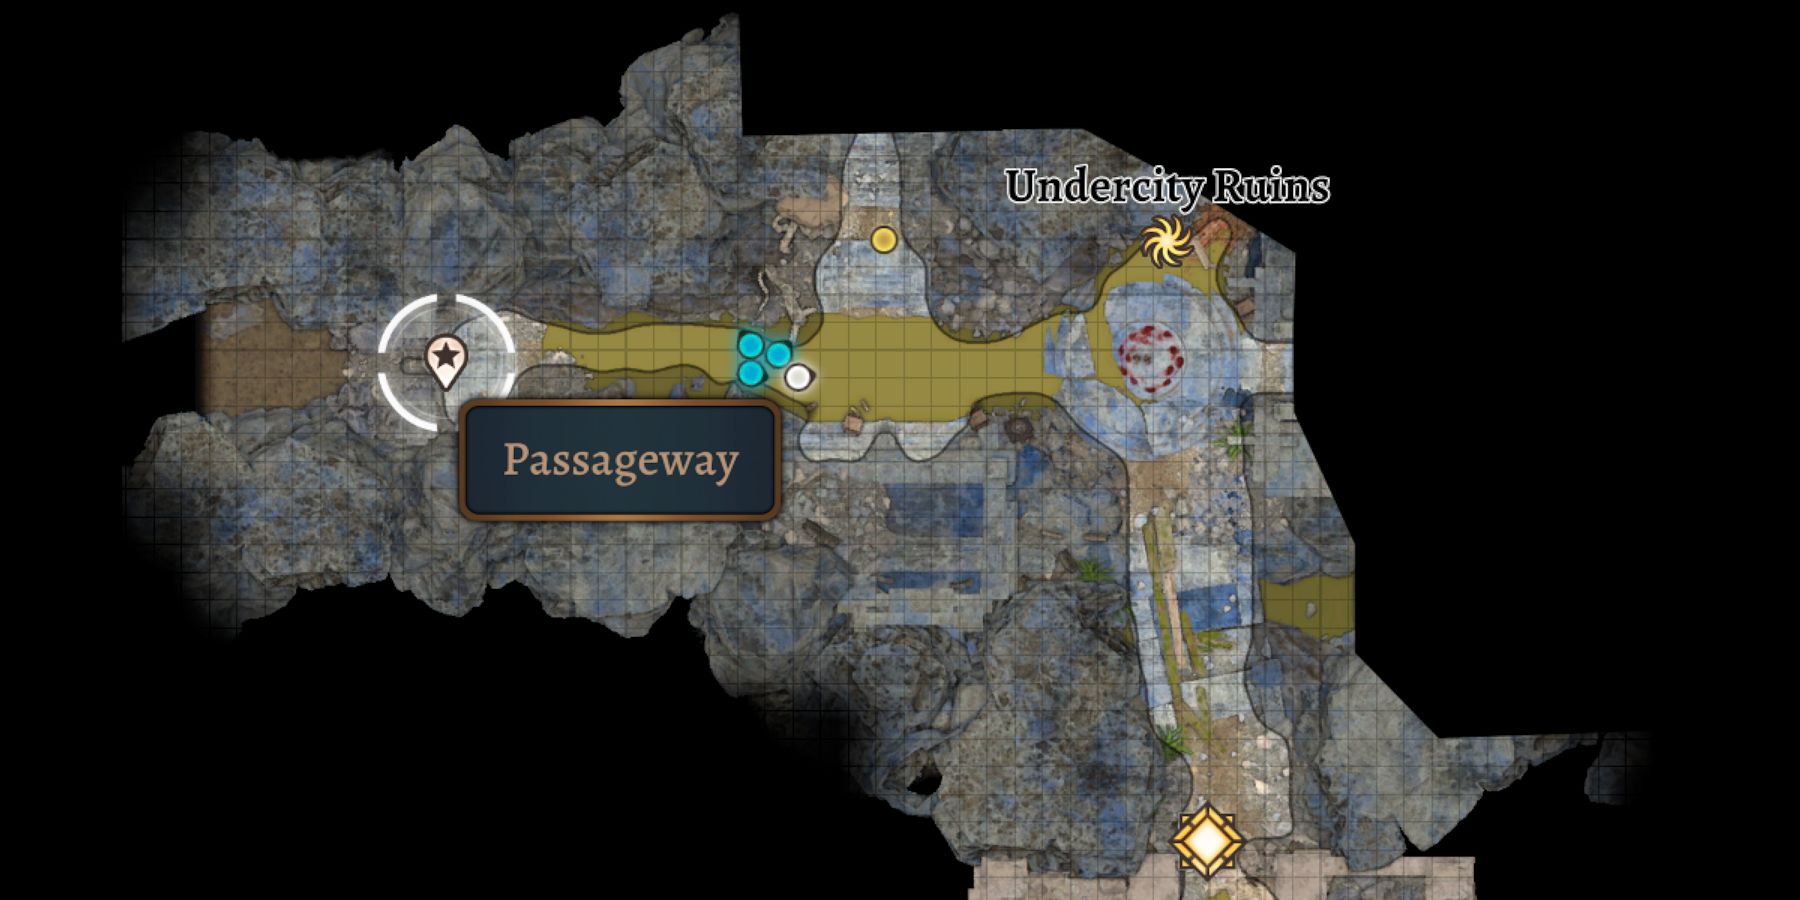 the passageway is labeled on the map